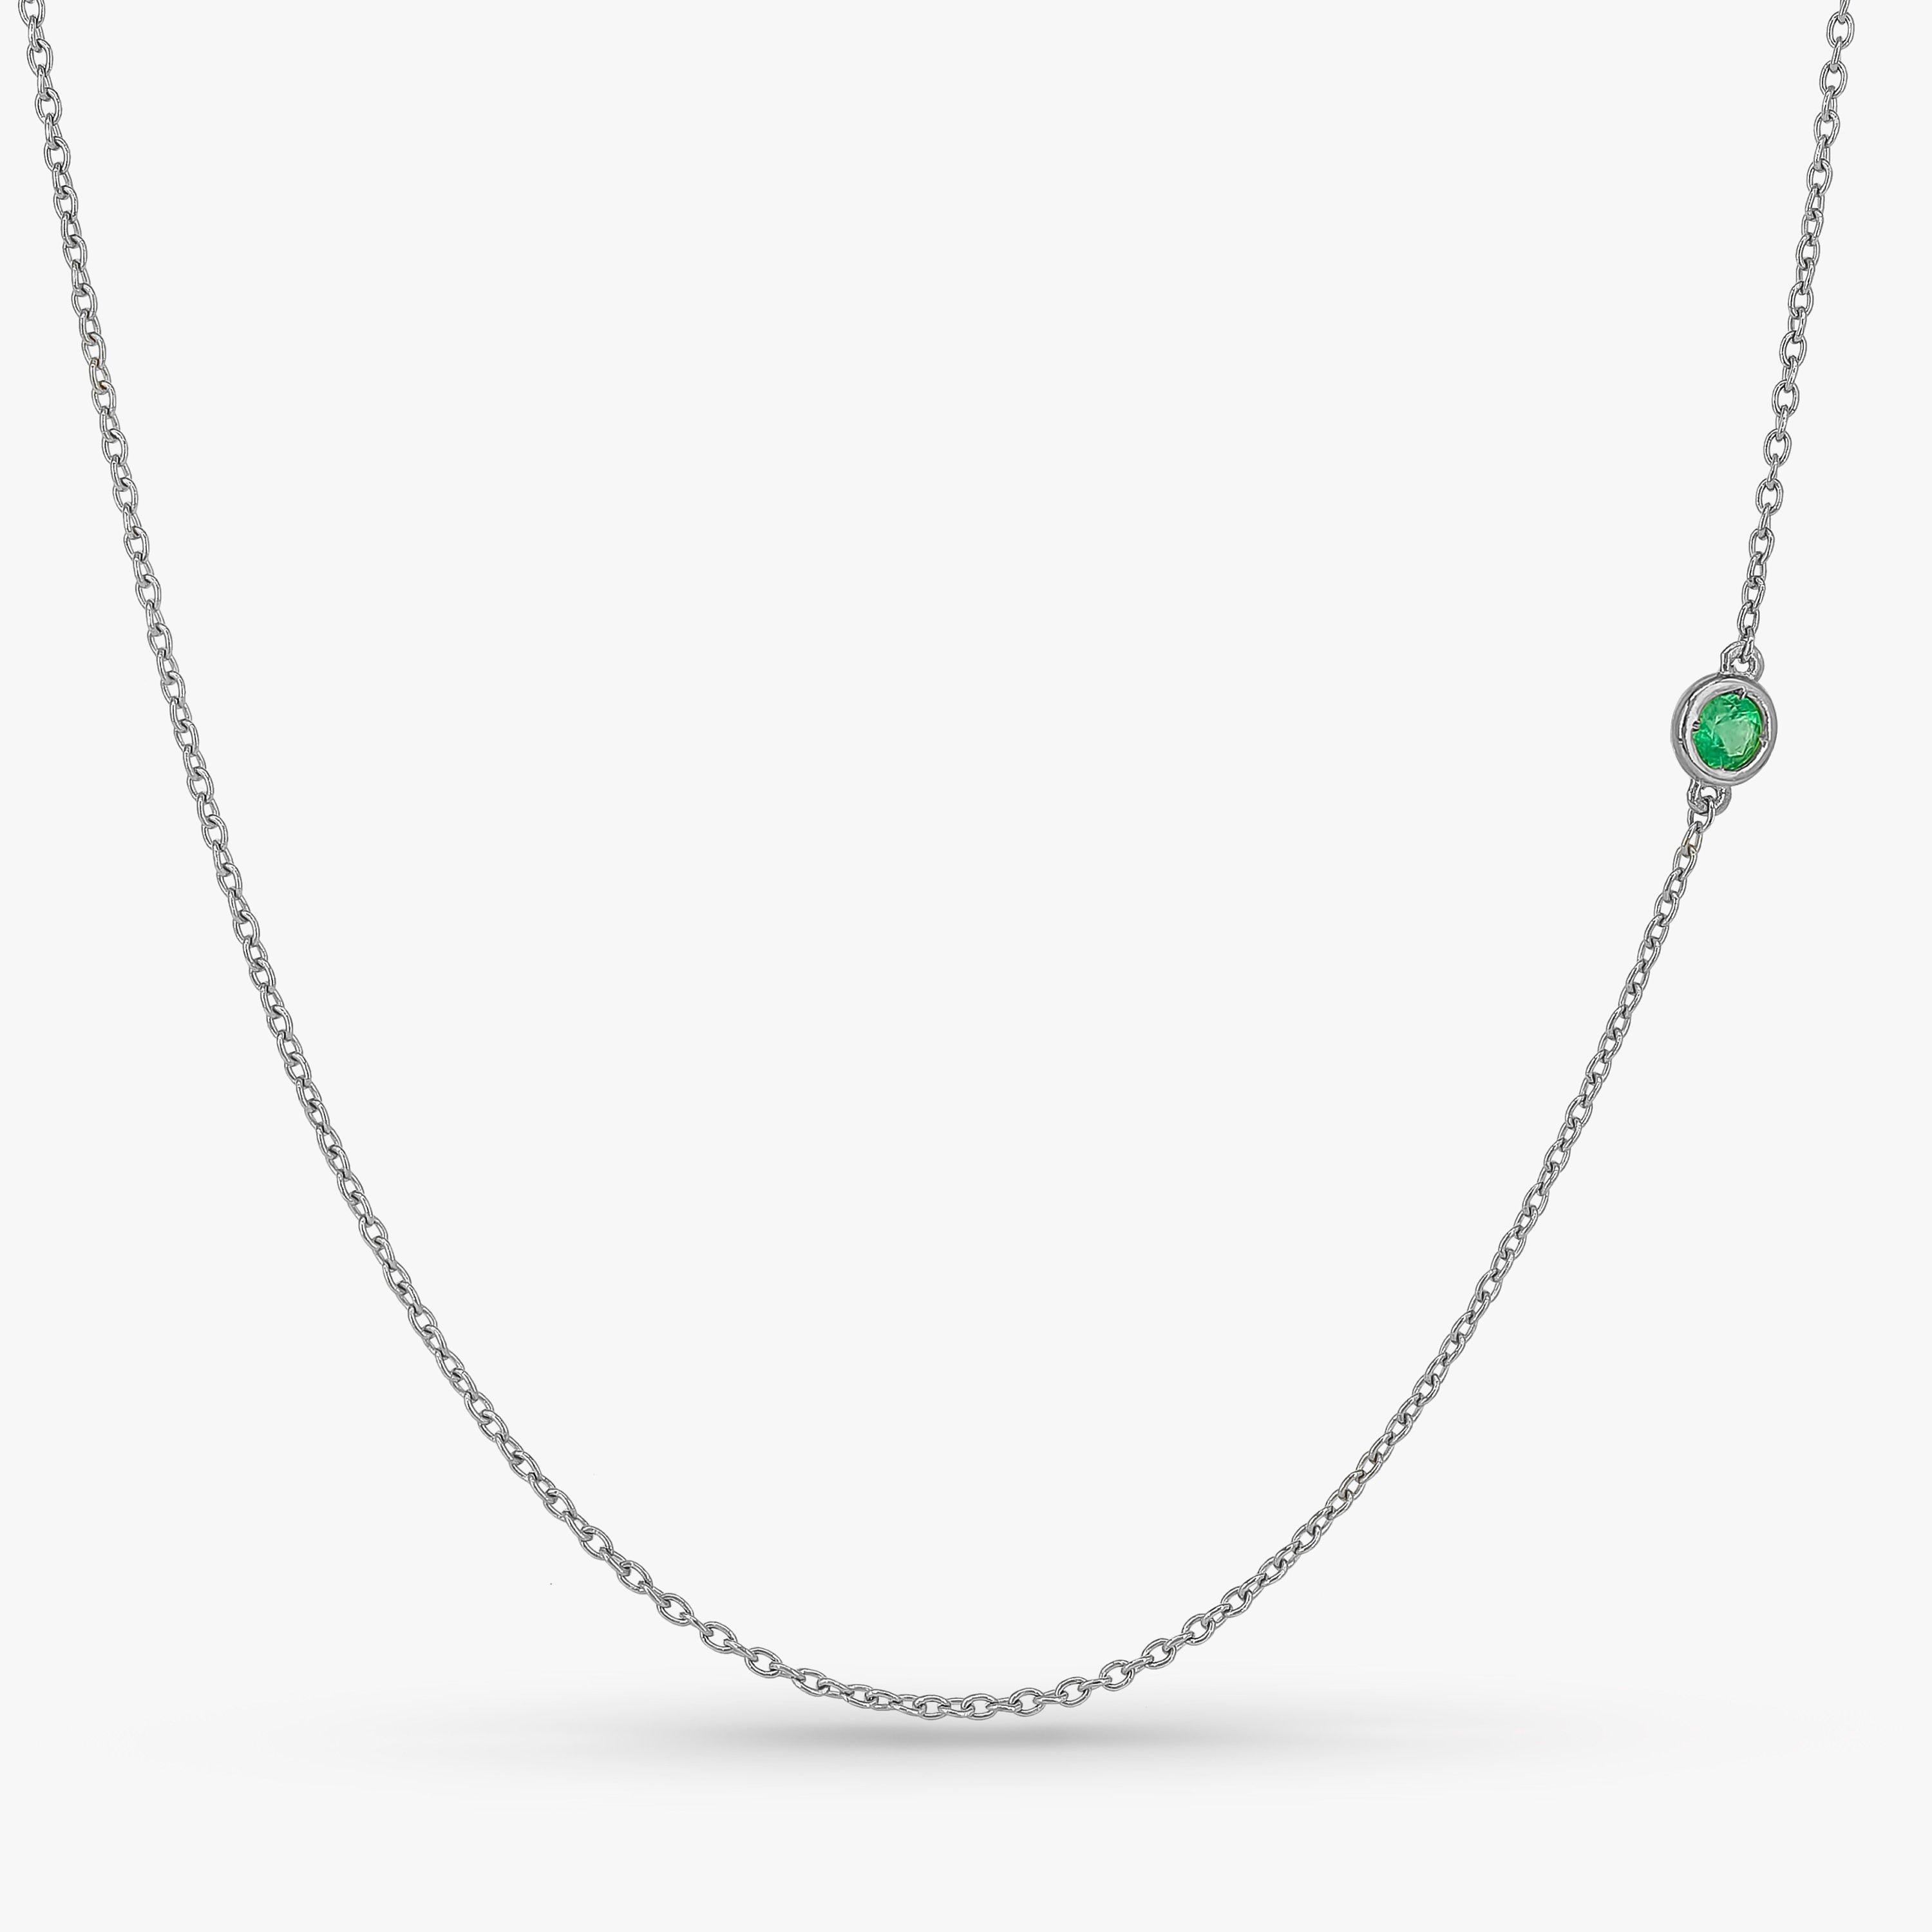 Genuine Emerald Necklace Available in 14K and 18K Gold